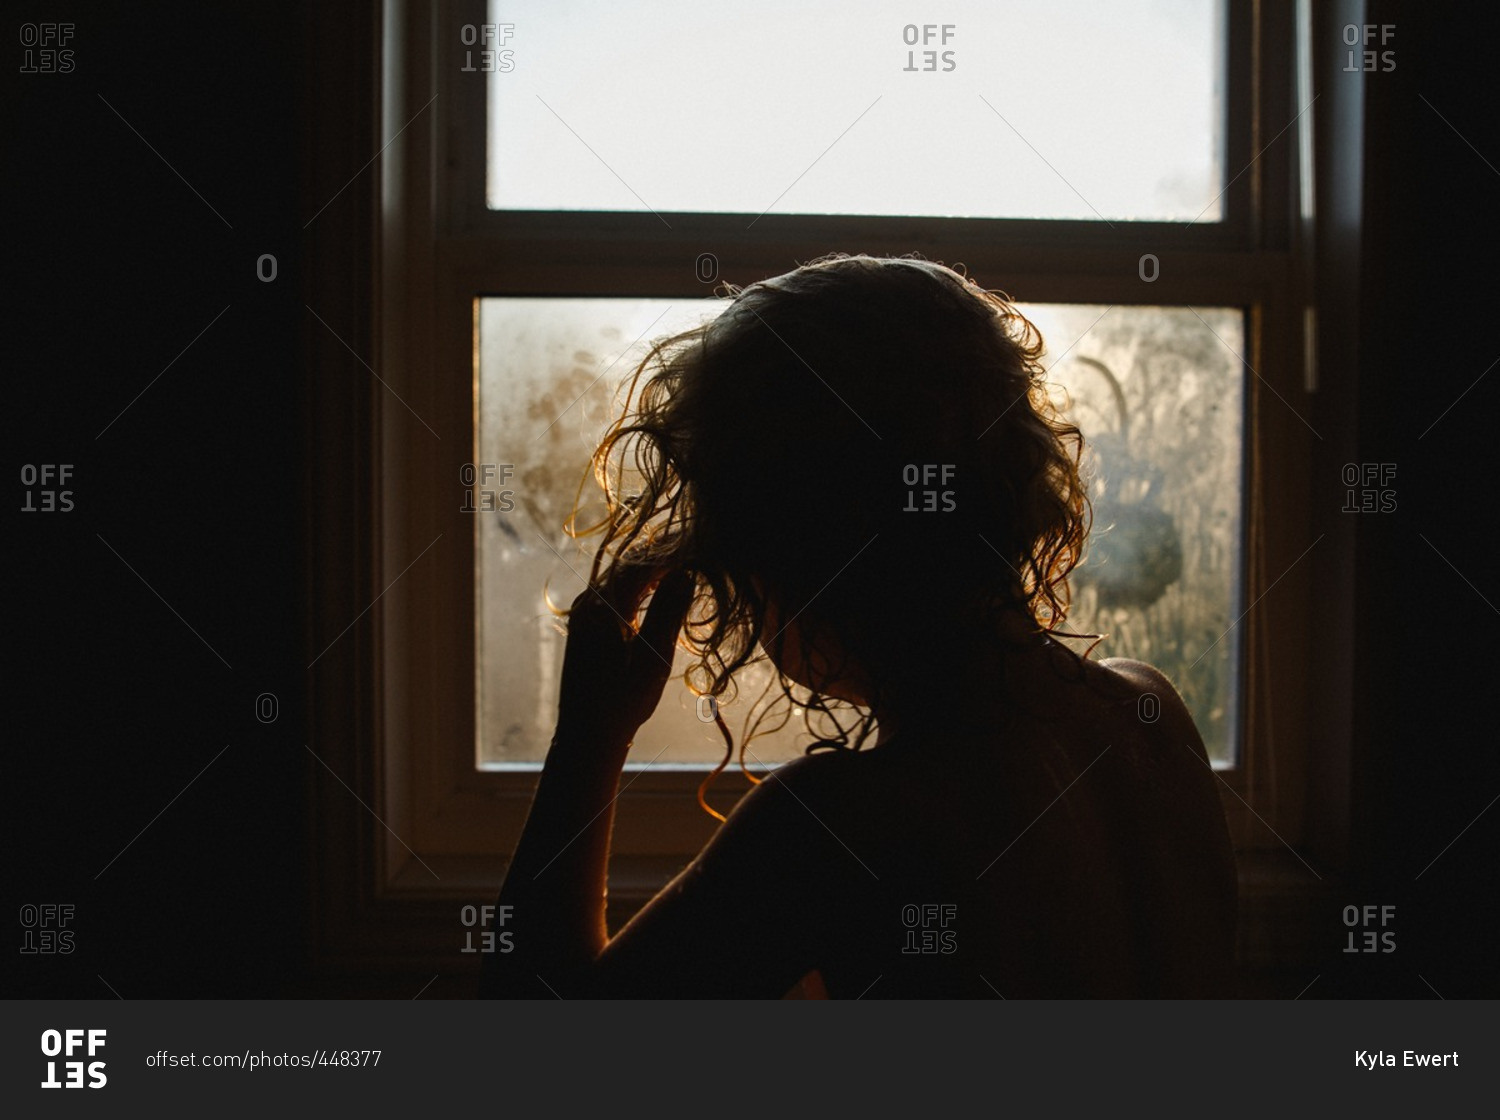 Child with wet hair looking out a fogged window